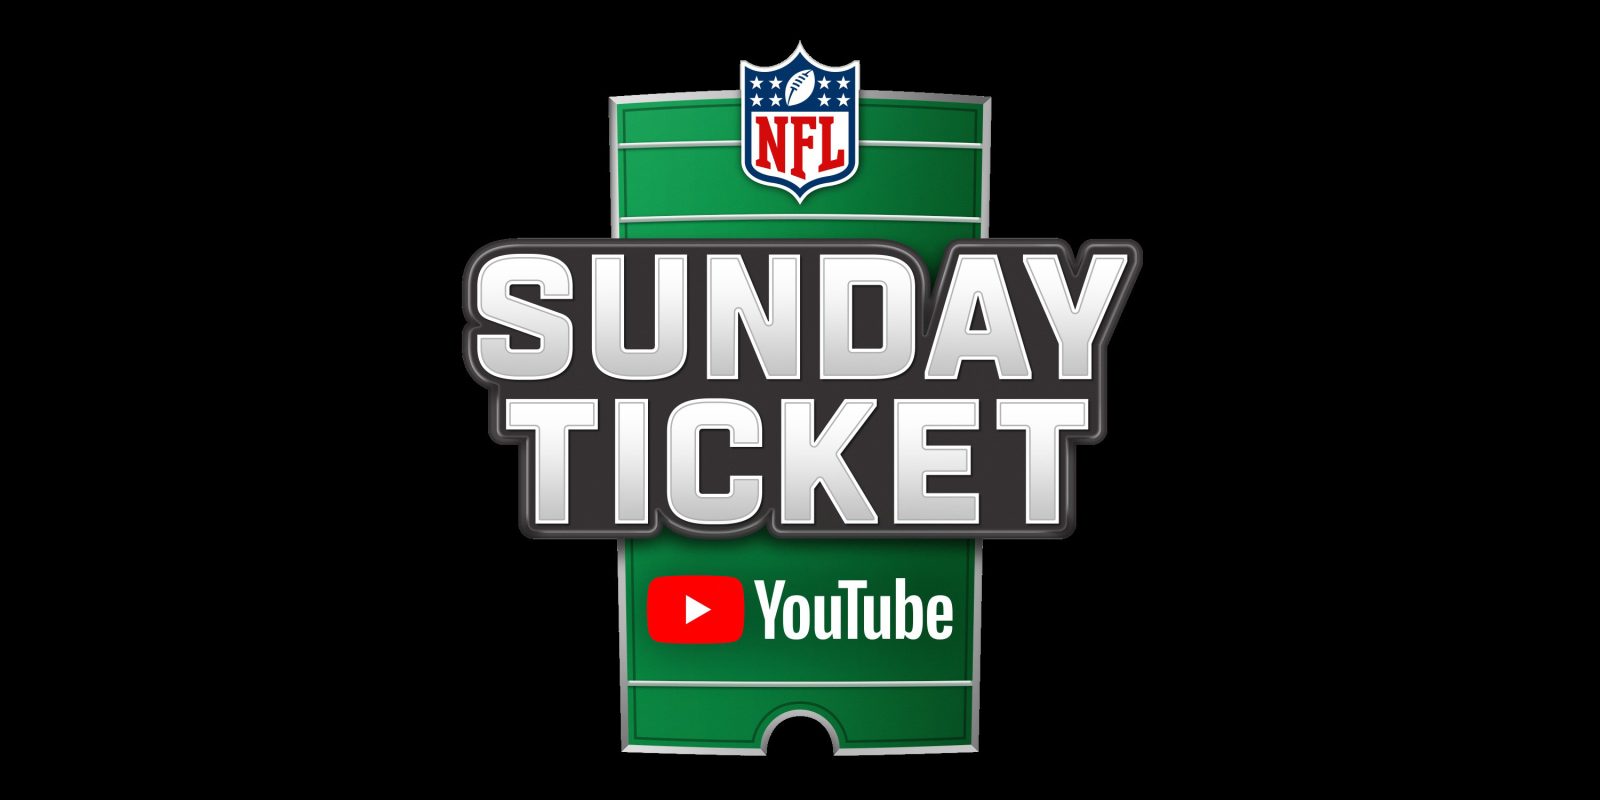 4. Military Discounts for NFL Sunday Ticket - wide 8